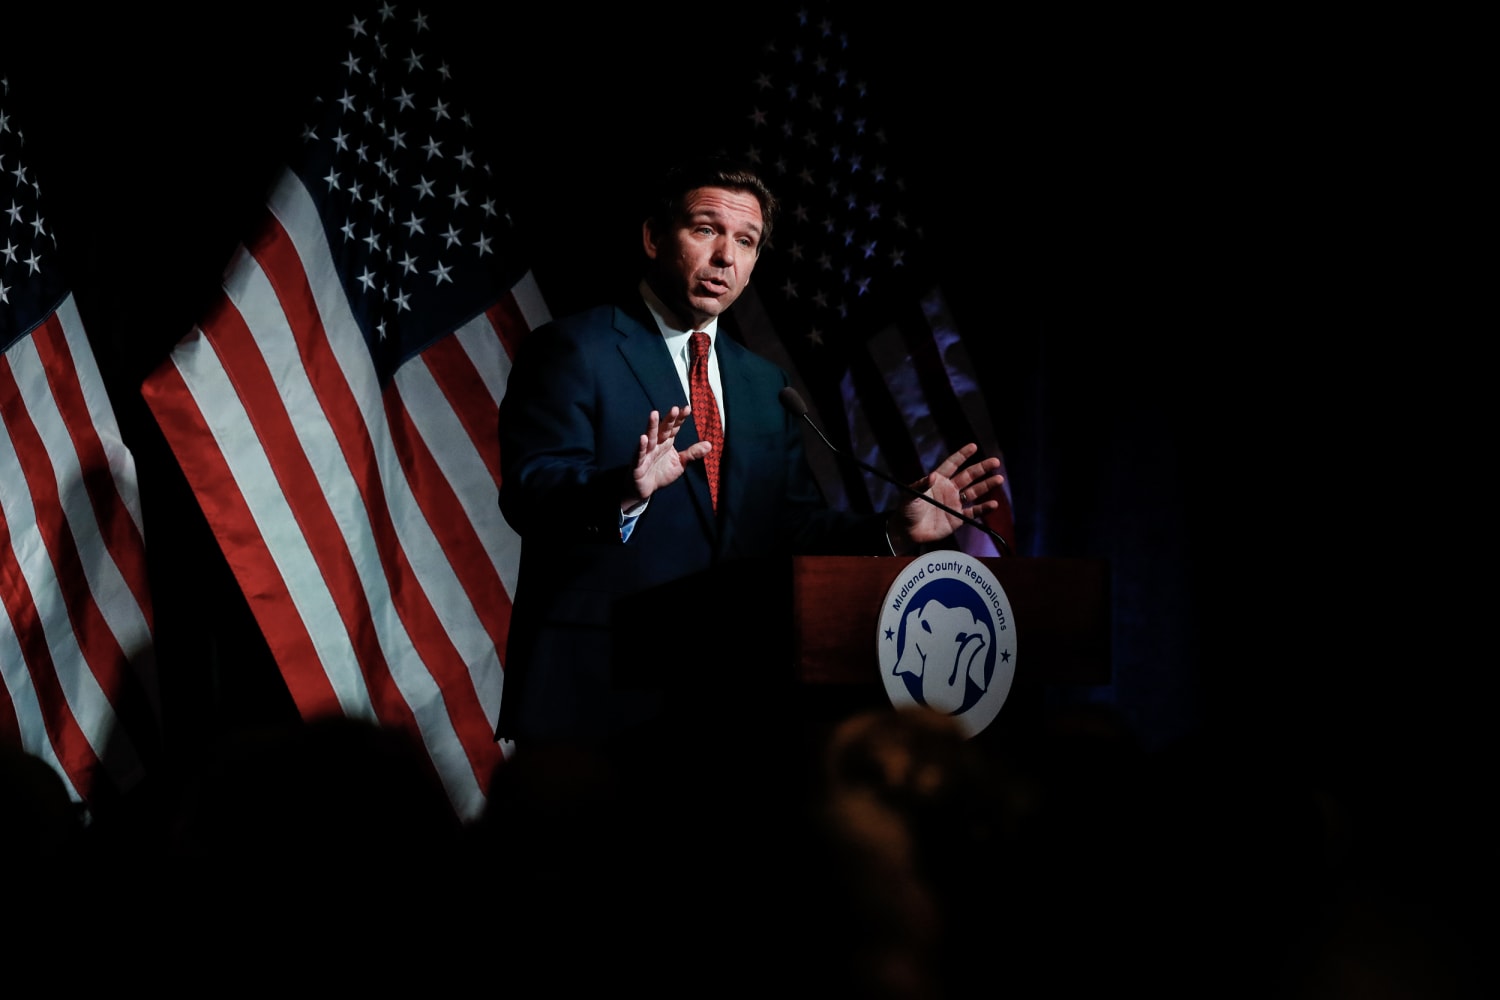 Ron DeSantis says he would consider presidential pardons for Jan. 6 rioters